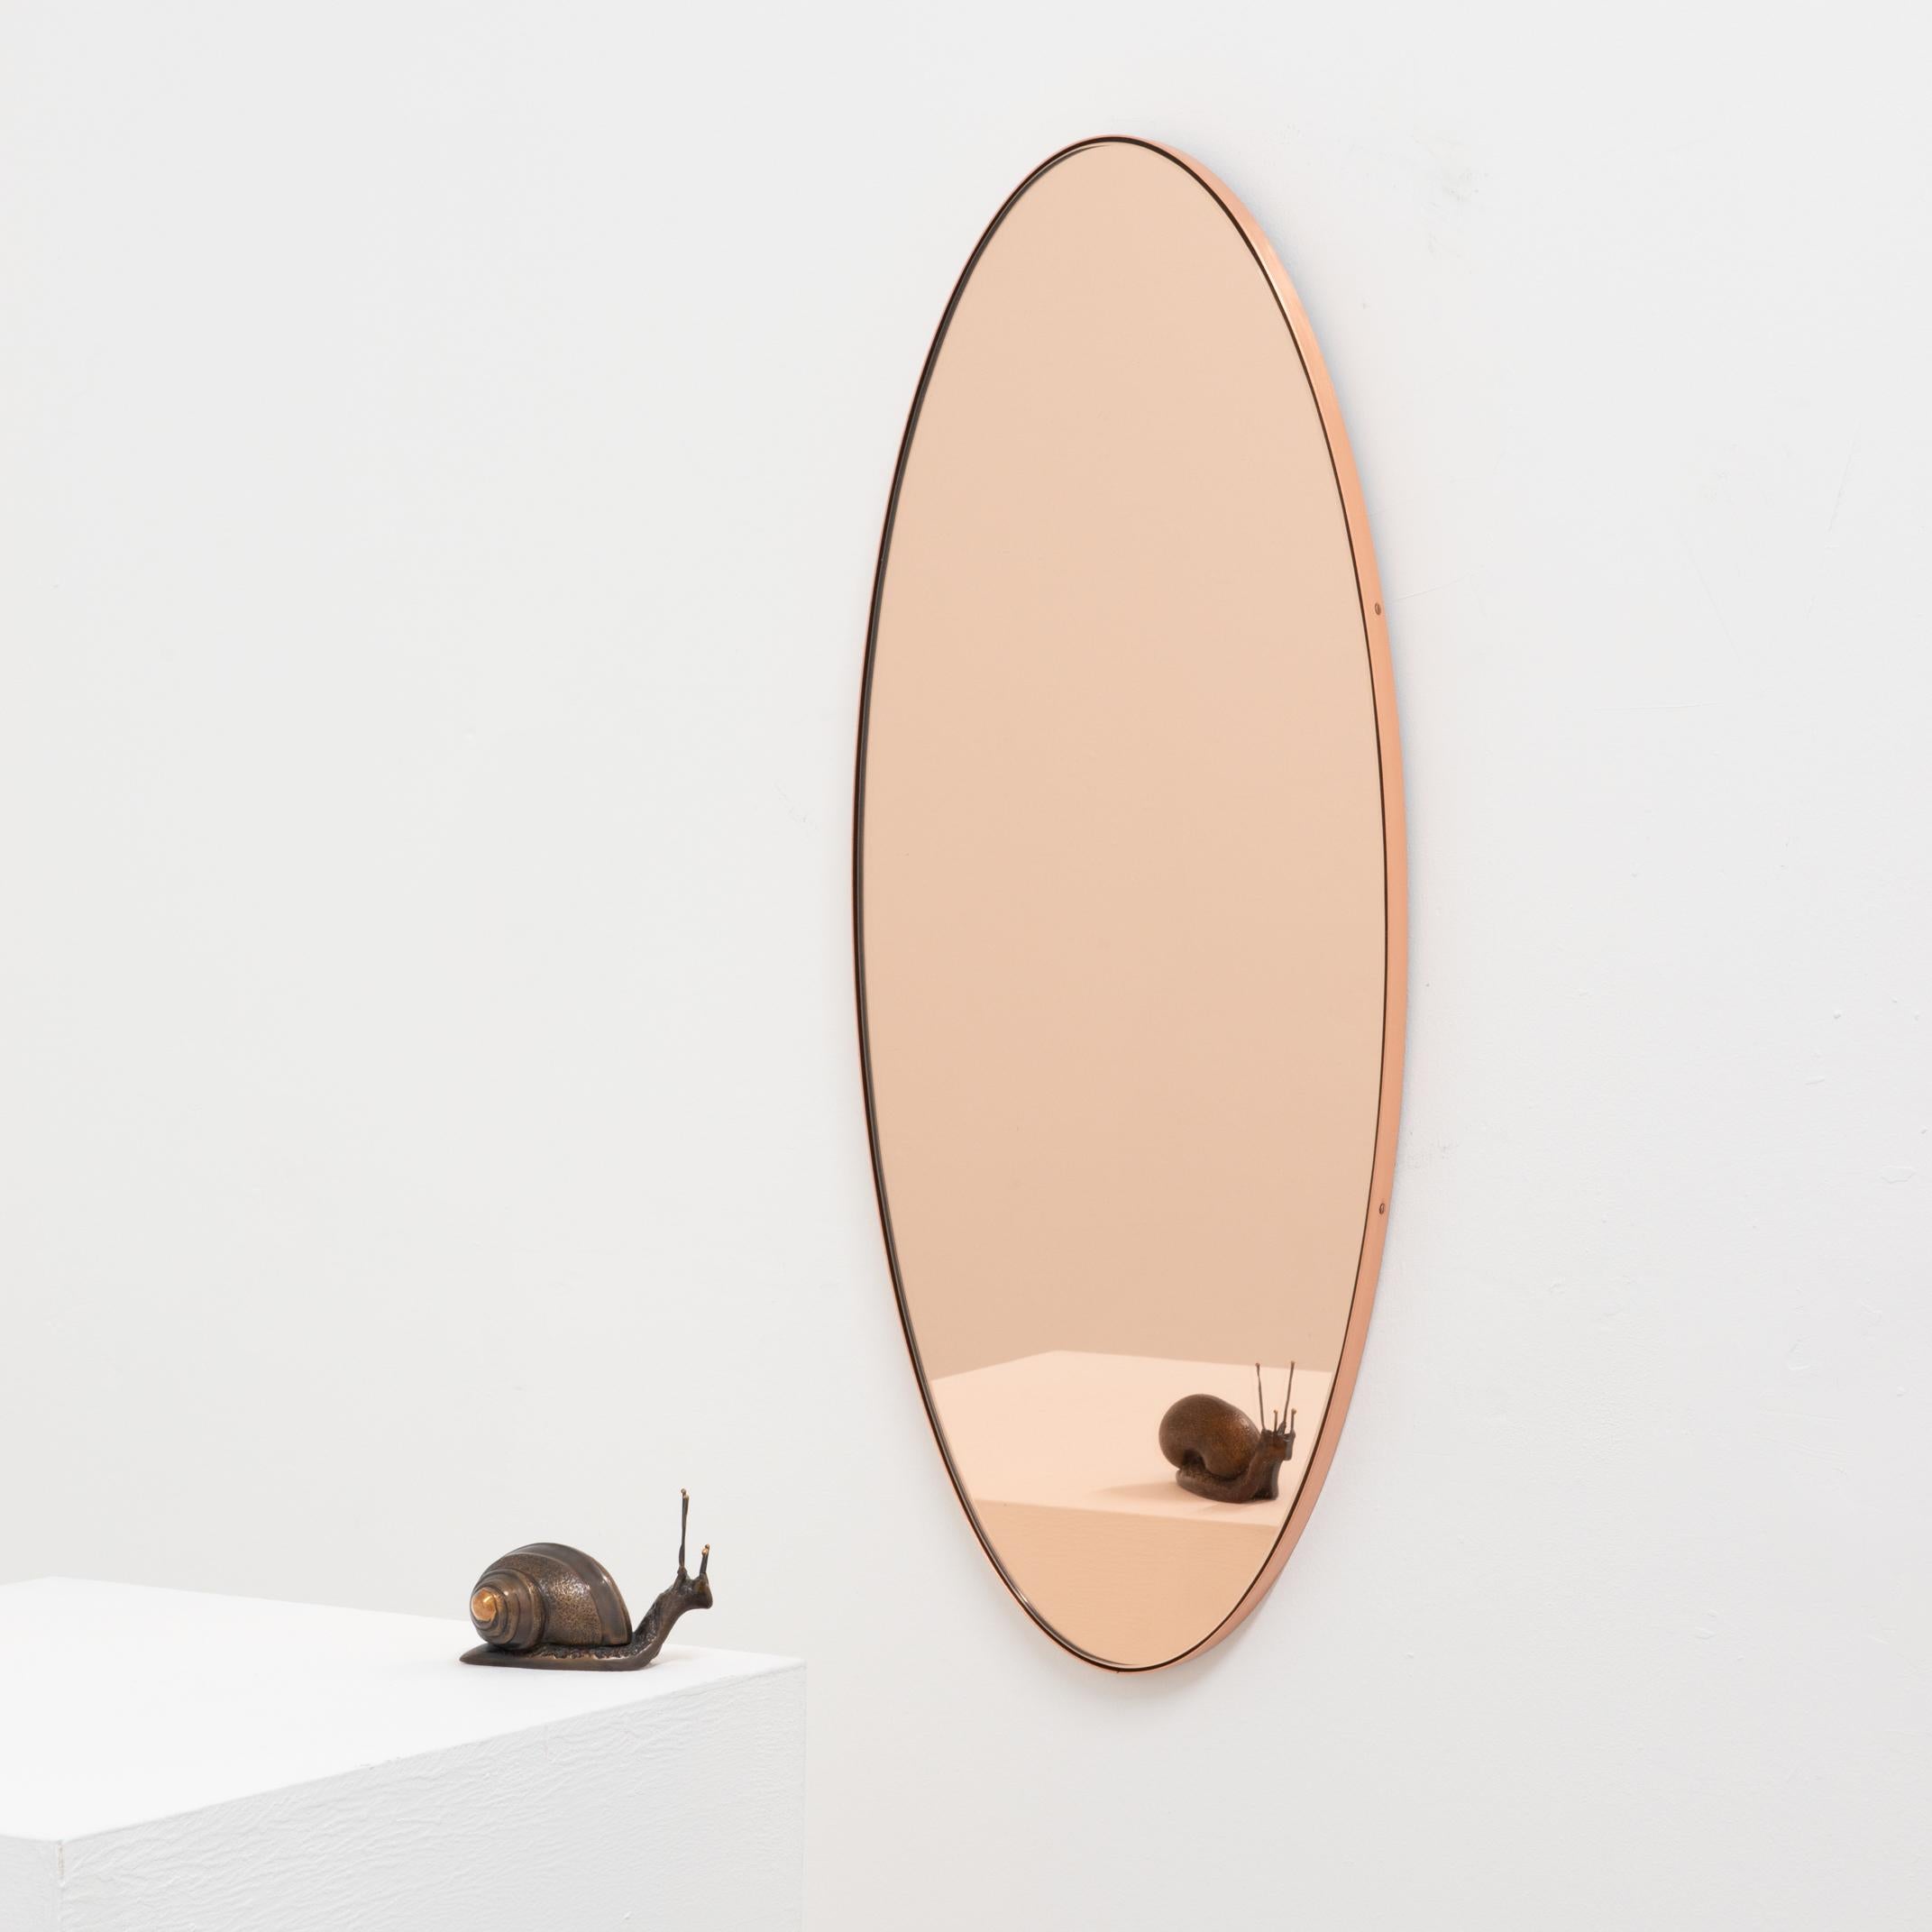 Contemporary oval shaped rose gold / peach mirror with an elegant copper frame. Designed and handcrafted in London, UK. Supplied fully fitted with a specialist hanging system for an easy installation.

The pictures show a small size, measuring